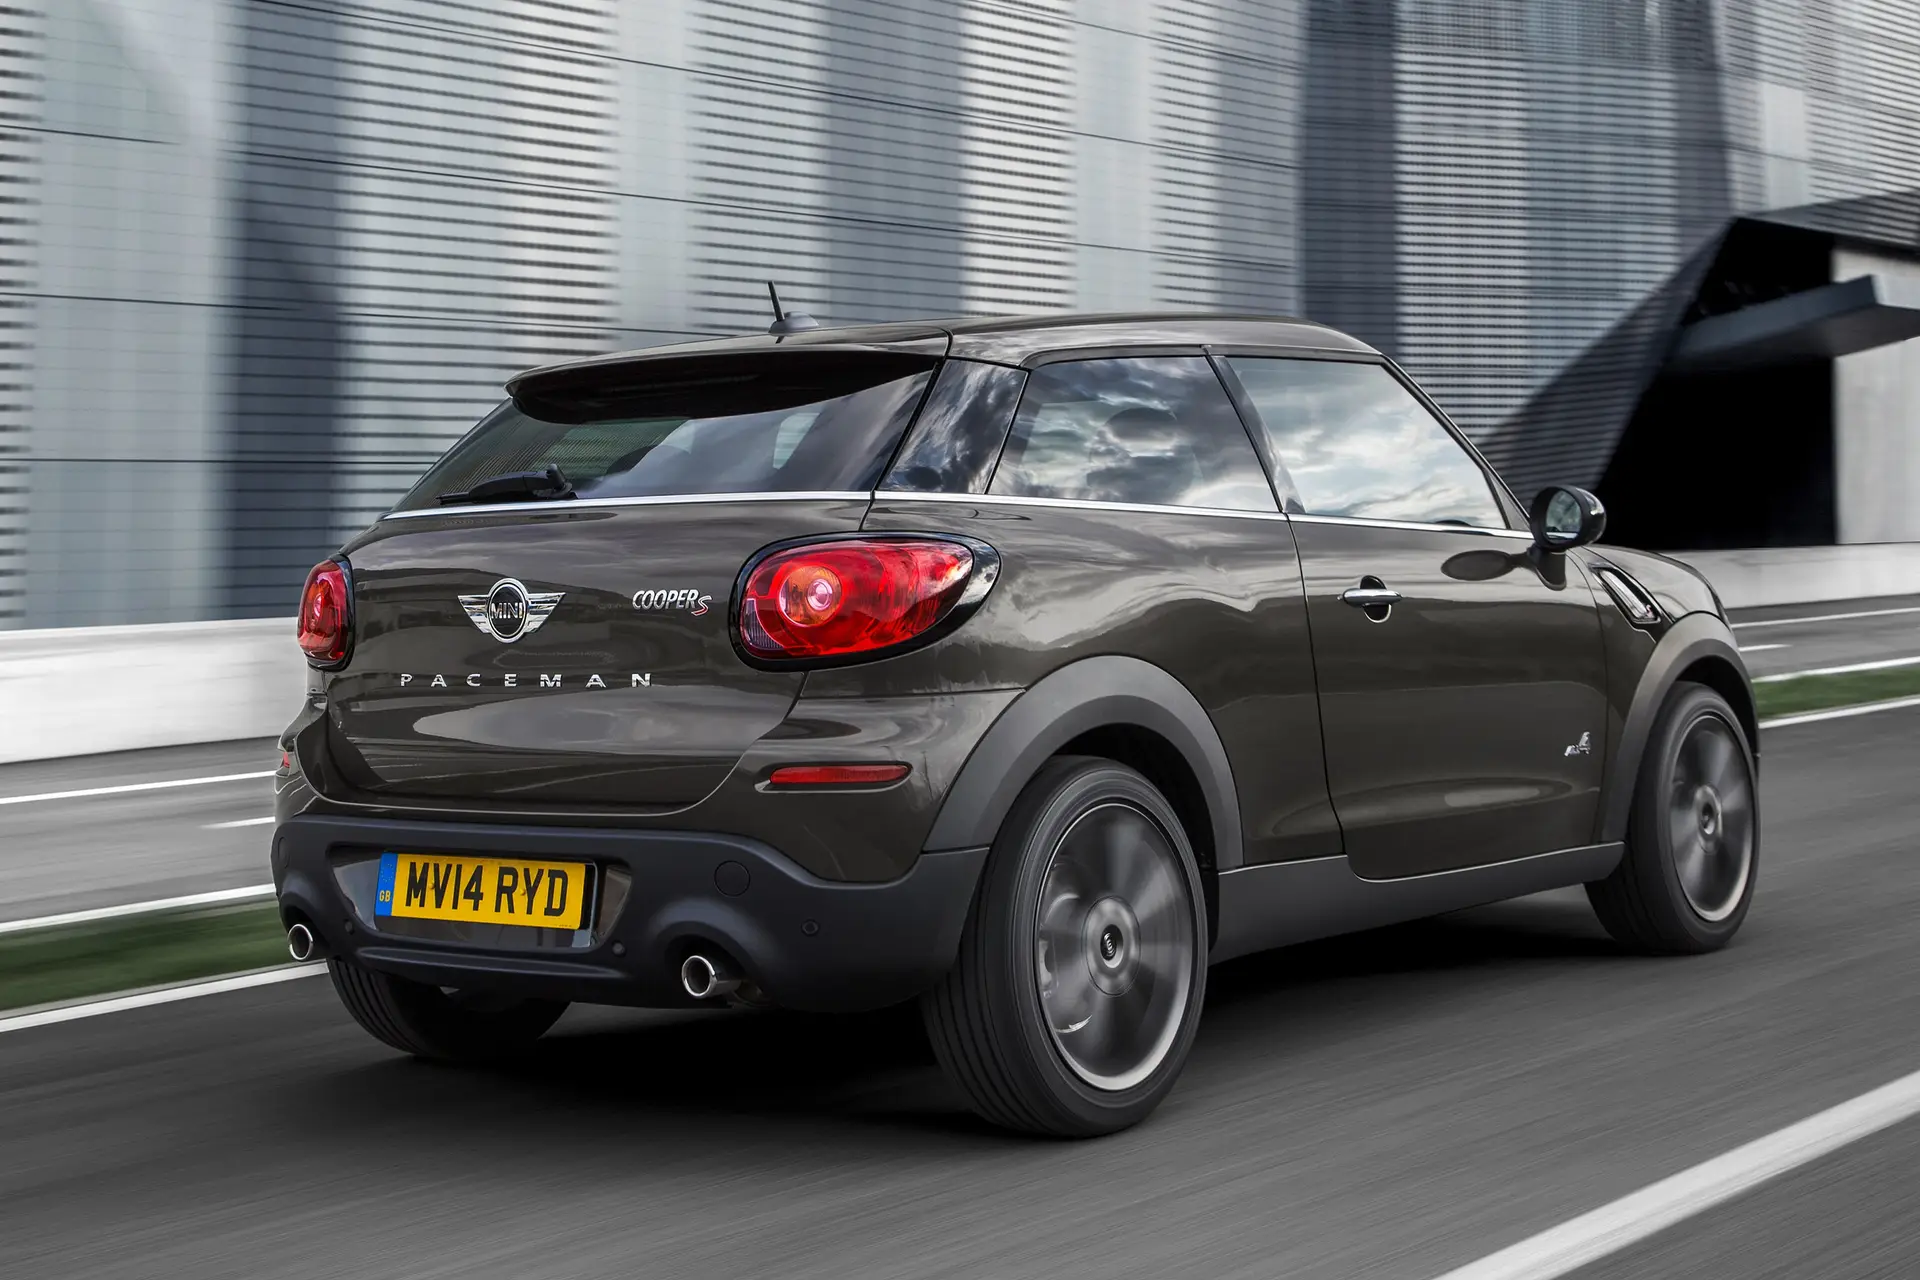 MINI Paceman (2013-2016) Review: exterior rear three quarter photo of the MINI Paceman on the road